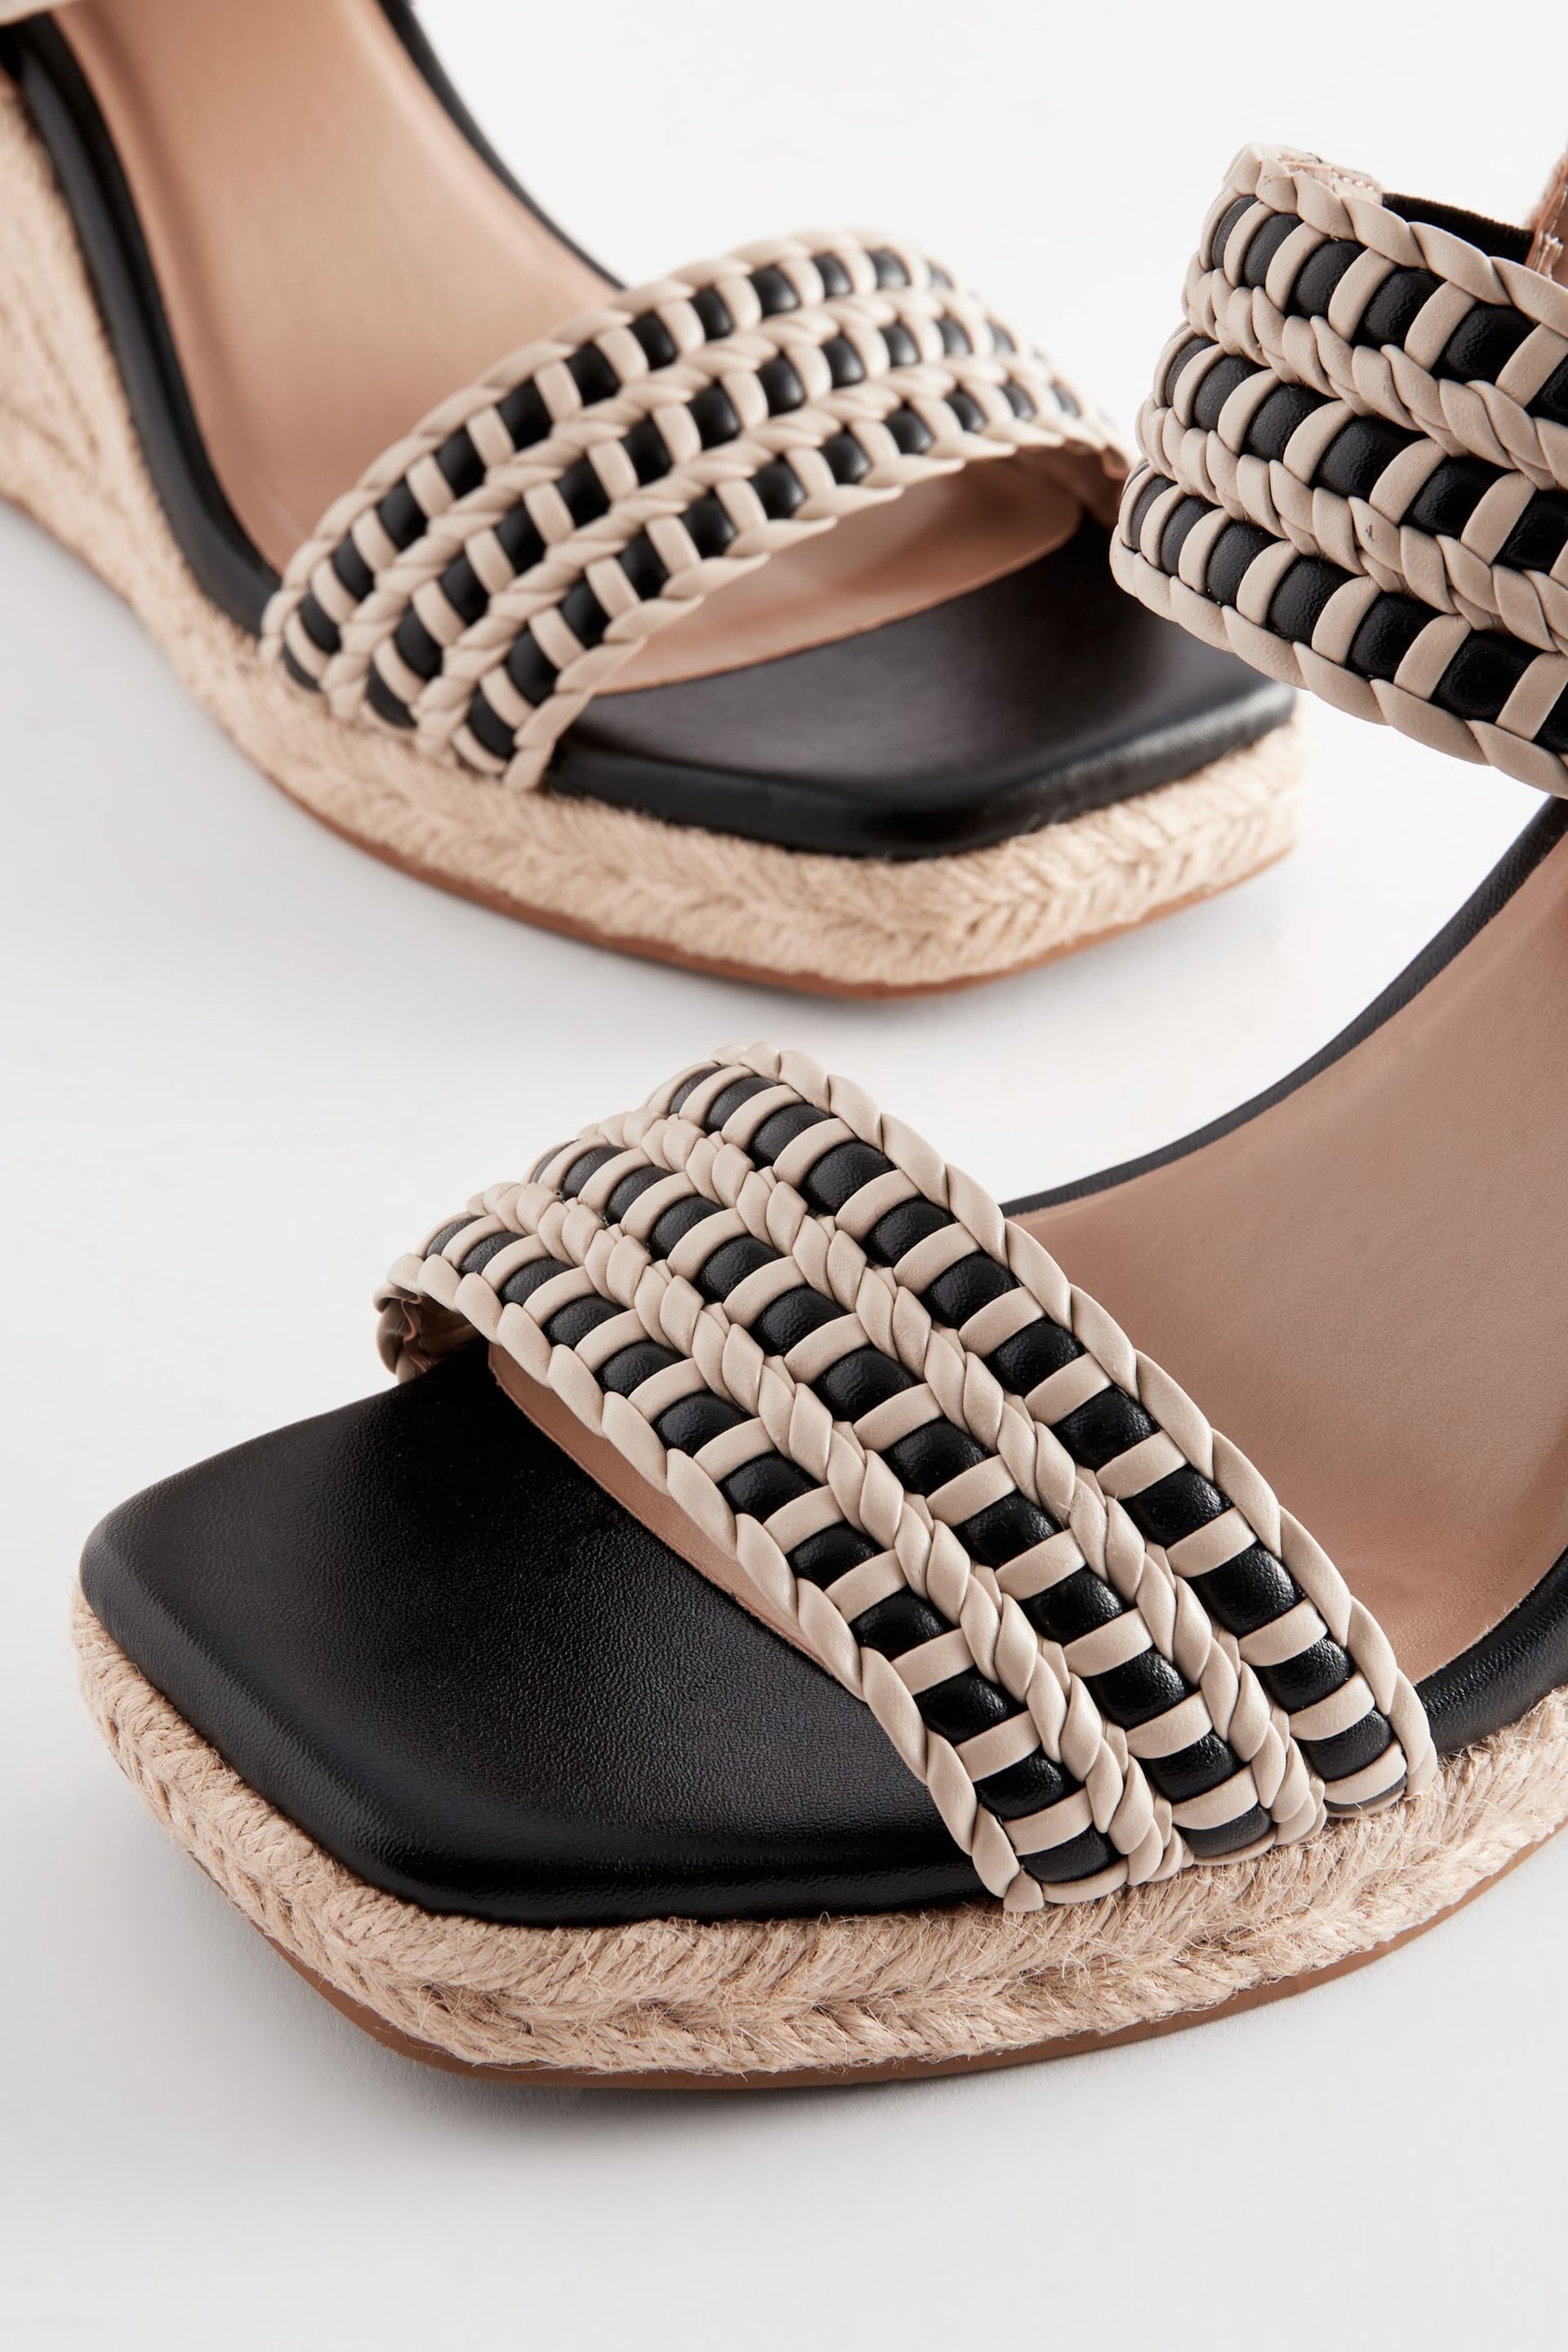 Monochrome Forever Comfort® Square Toe Weave Wedges - Image 5 of 8